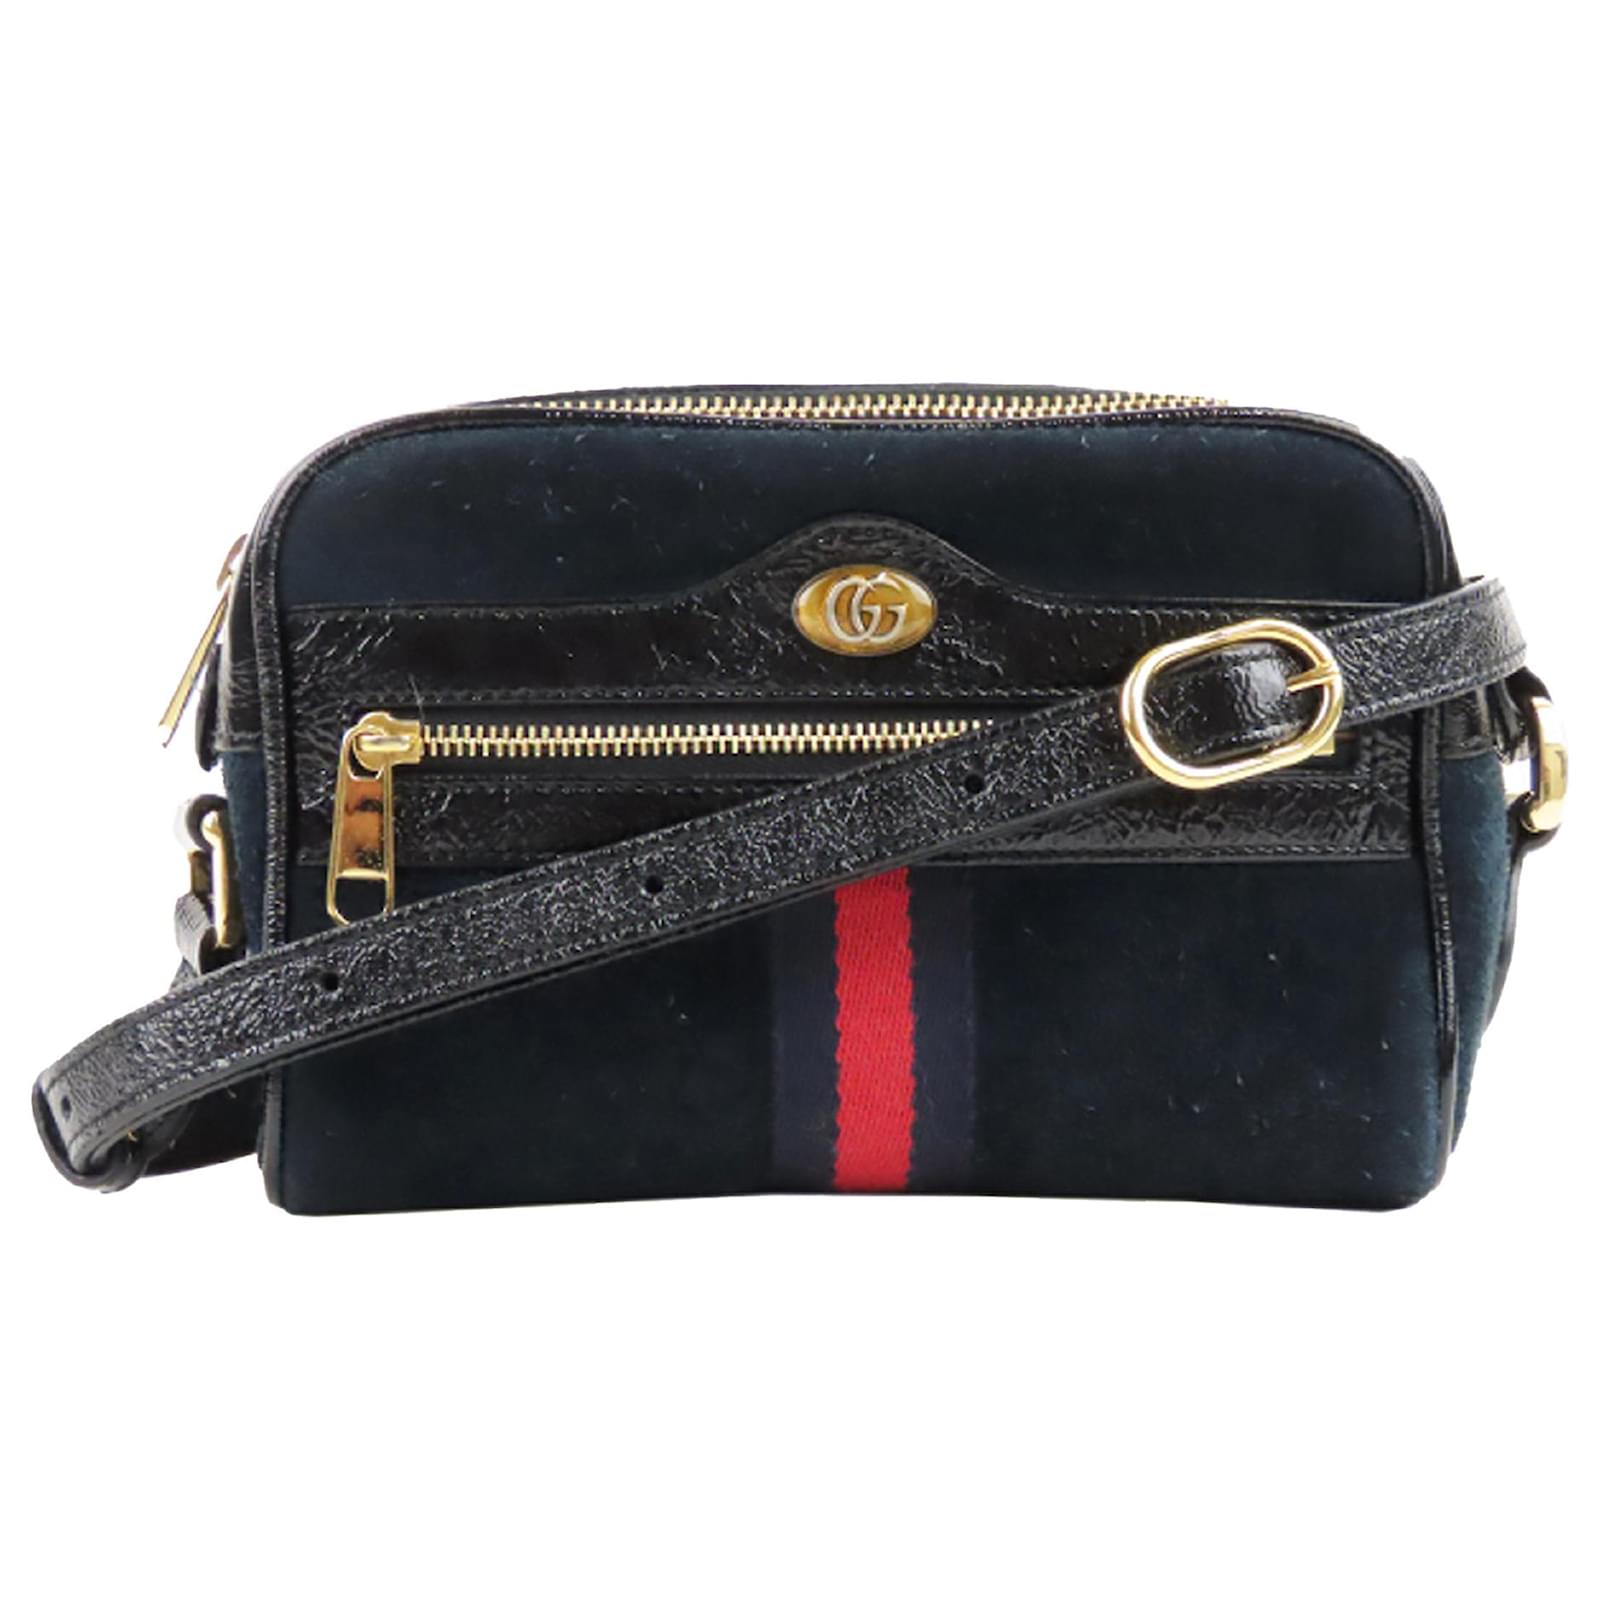 Gucci, Bags, Gucci Ophidia Suede Mini Bag Navy